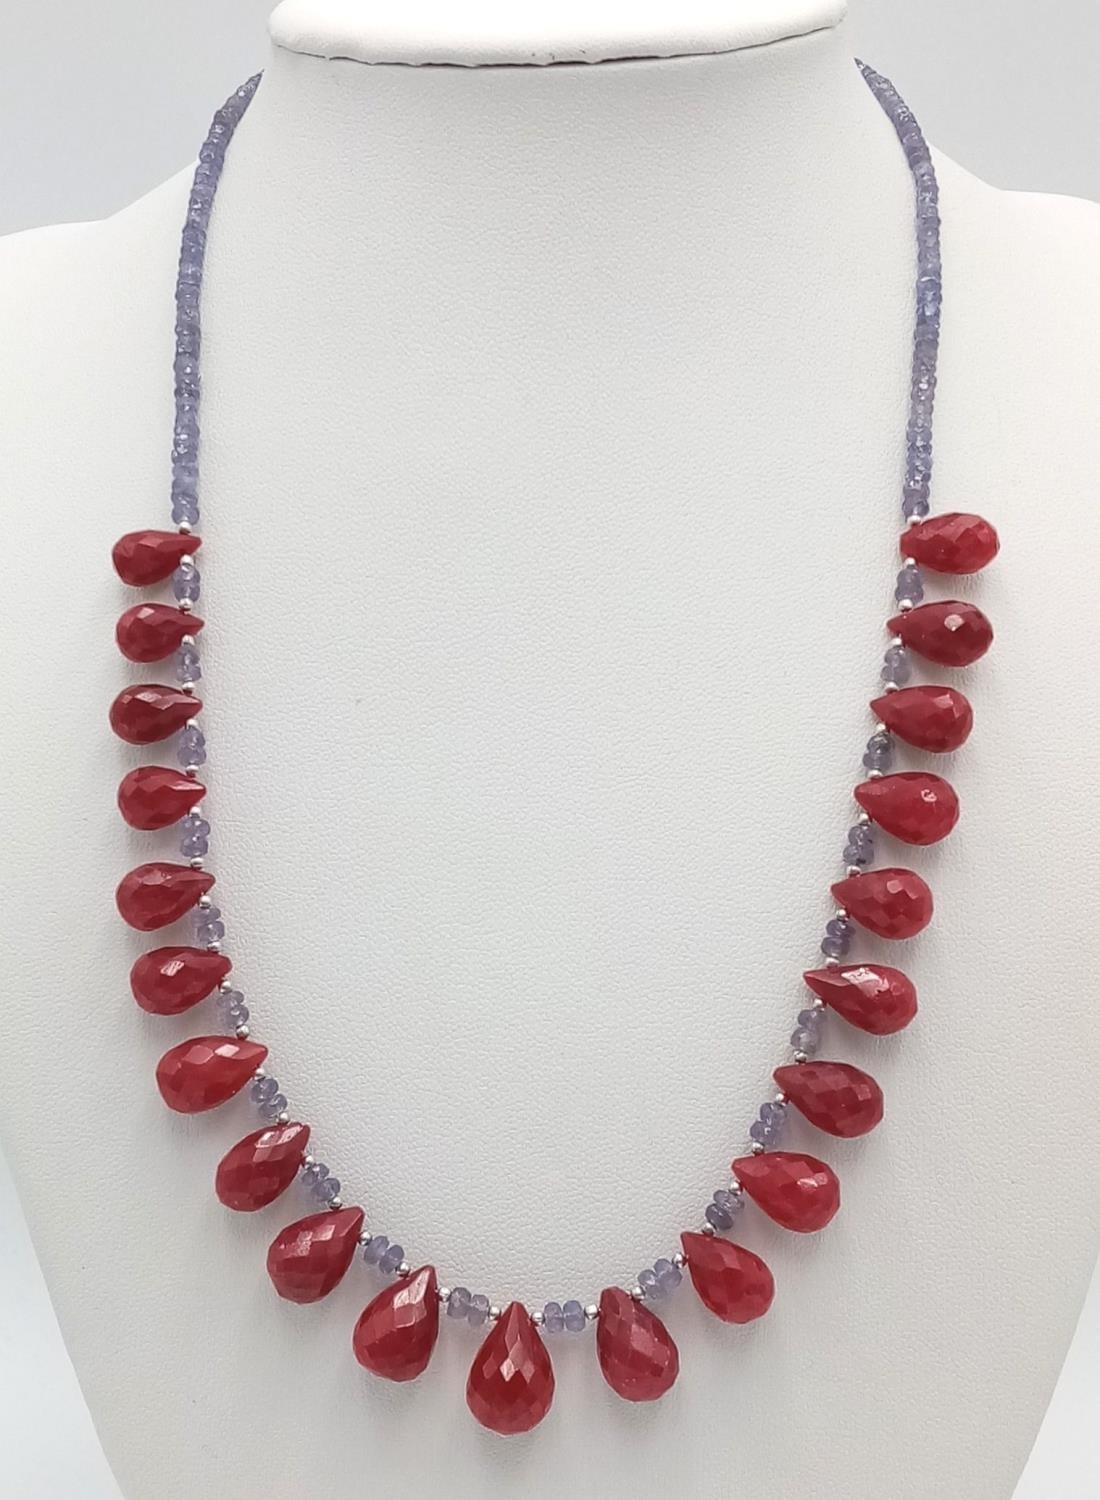 A Tanzanite Small Rondelle Necklace with Ruby Drops. 925 Silver Clasp. 150ctw gemstones. 42cm